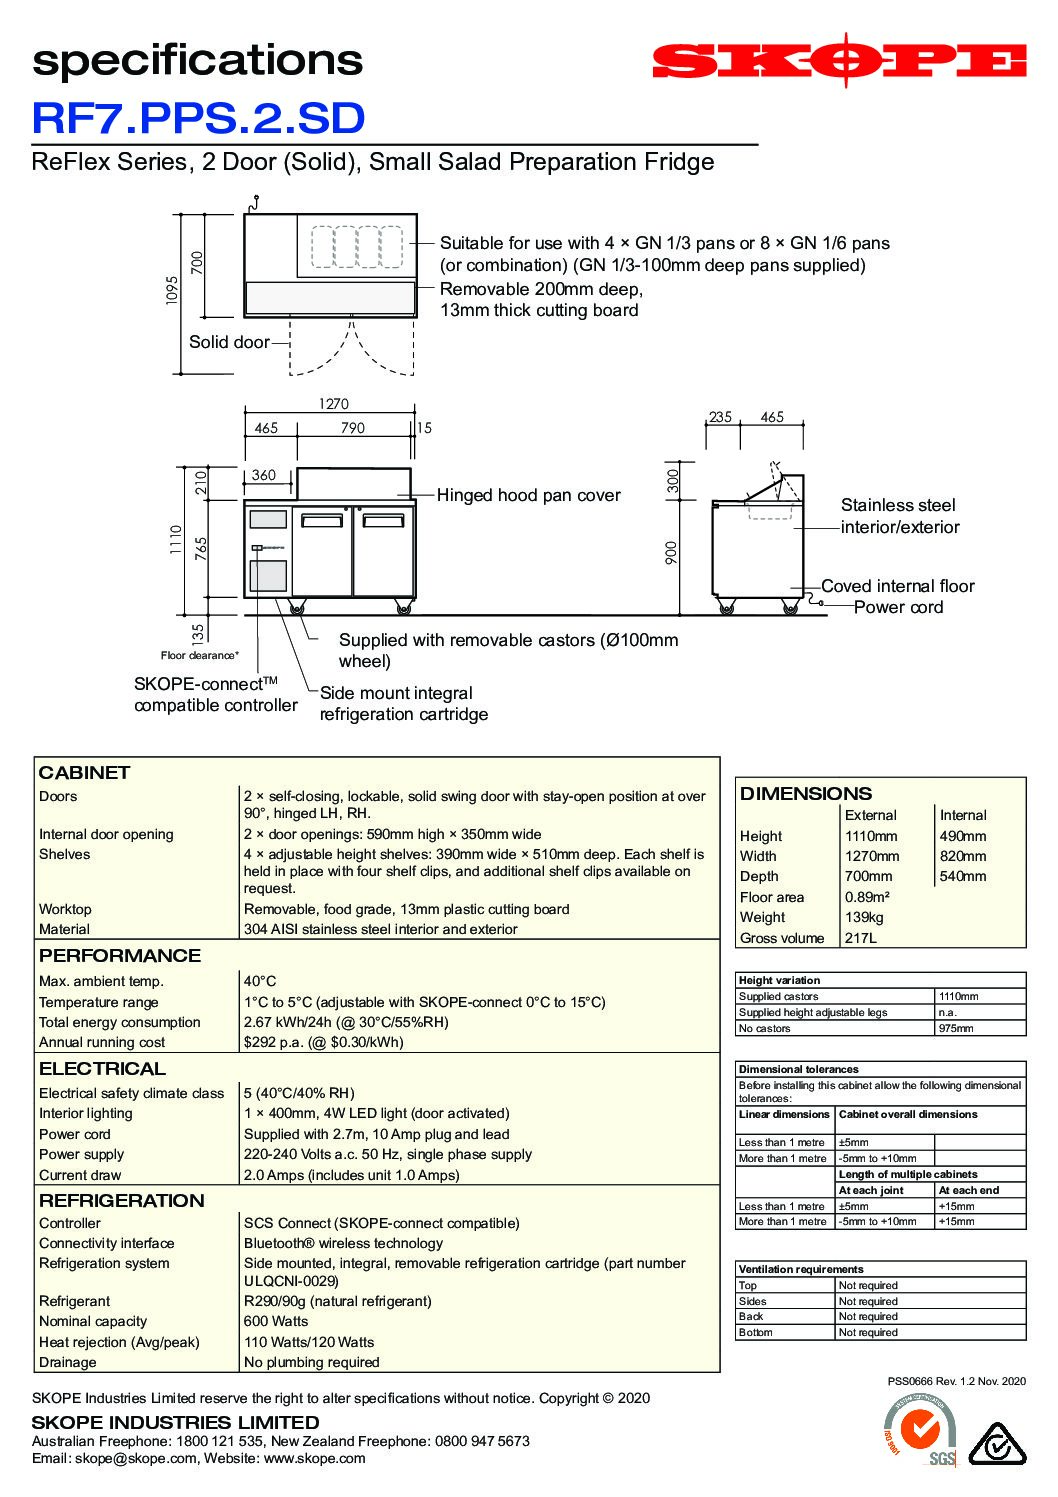 cover page of the ReFlex 2 Solid Door GN Compatible Salad Preparation Fridge specification sheet pdf